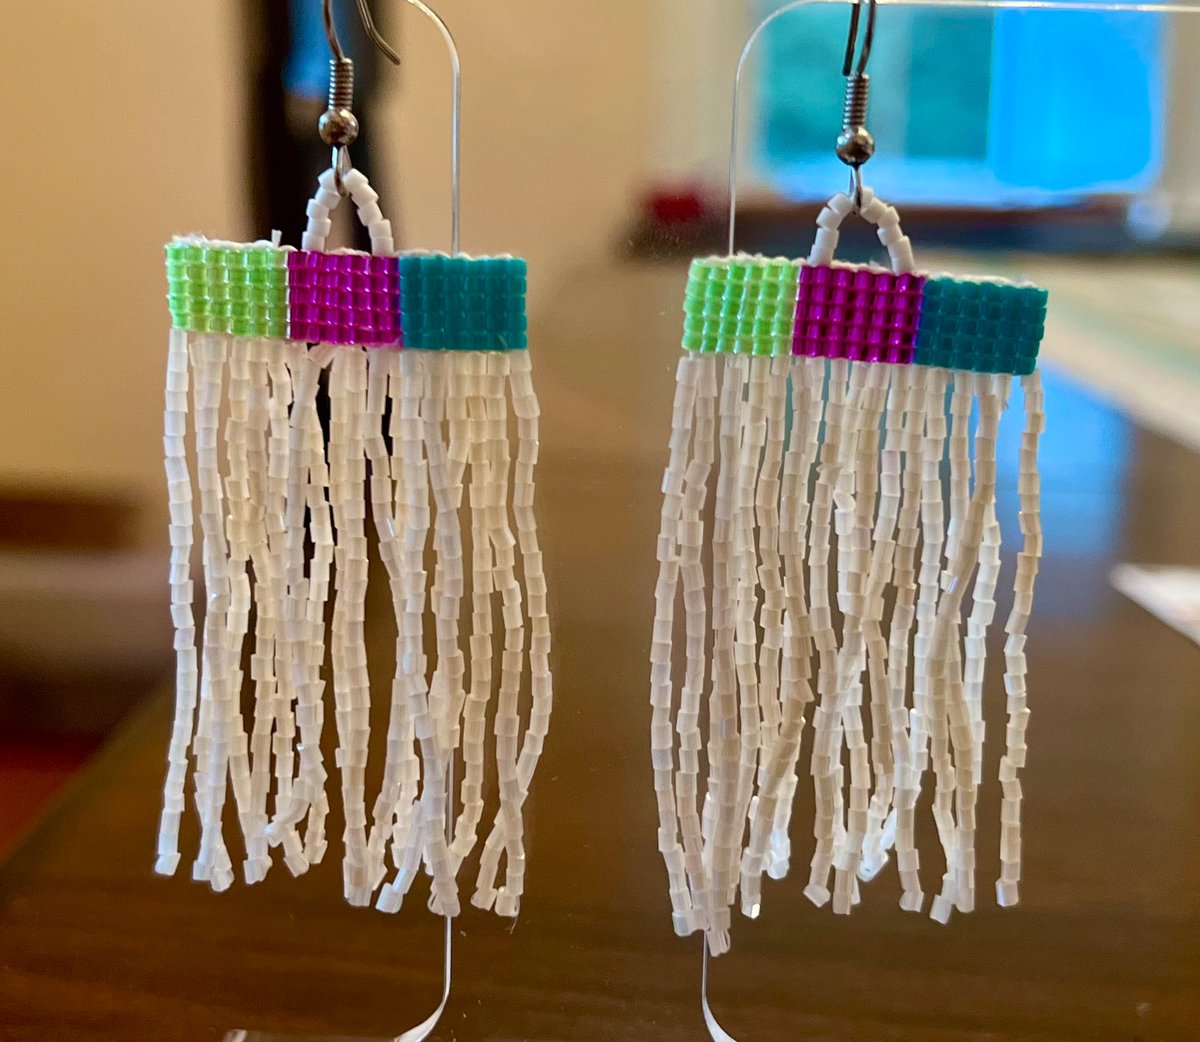 So I decided to dabble in some seed bead jewelry-making and came up with these beauties! #seedbeads #seedbeadjewelry #beadweaving #beads #beadersofinstagram #beading #handmade